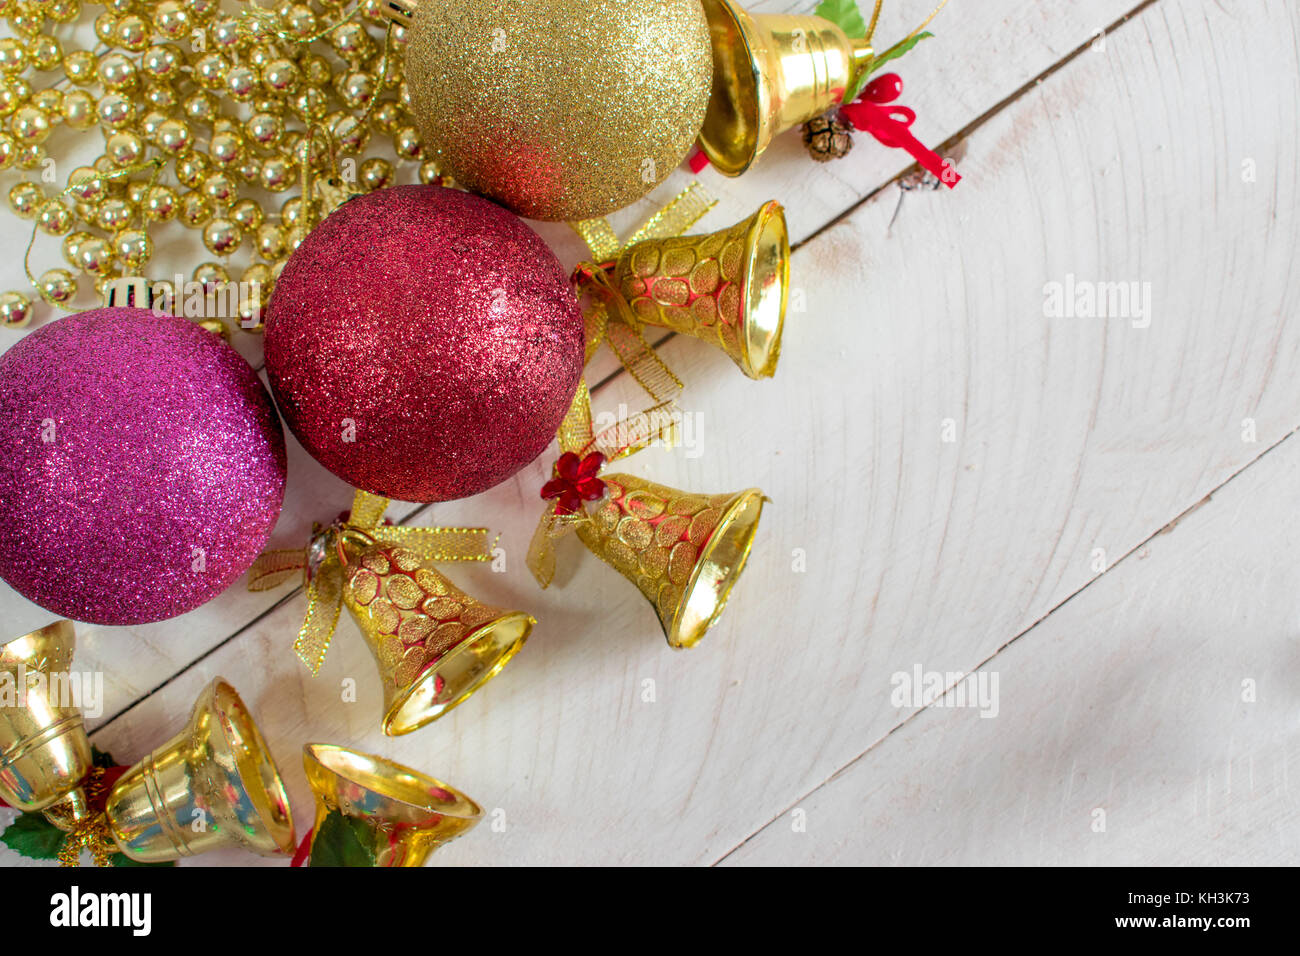 Christmas Decoration, chains, bells and colorful reflective balls, on top of a white wood surface and white background Stock Photo